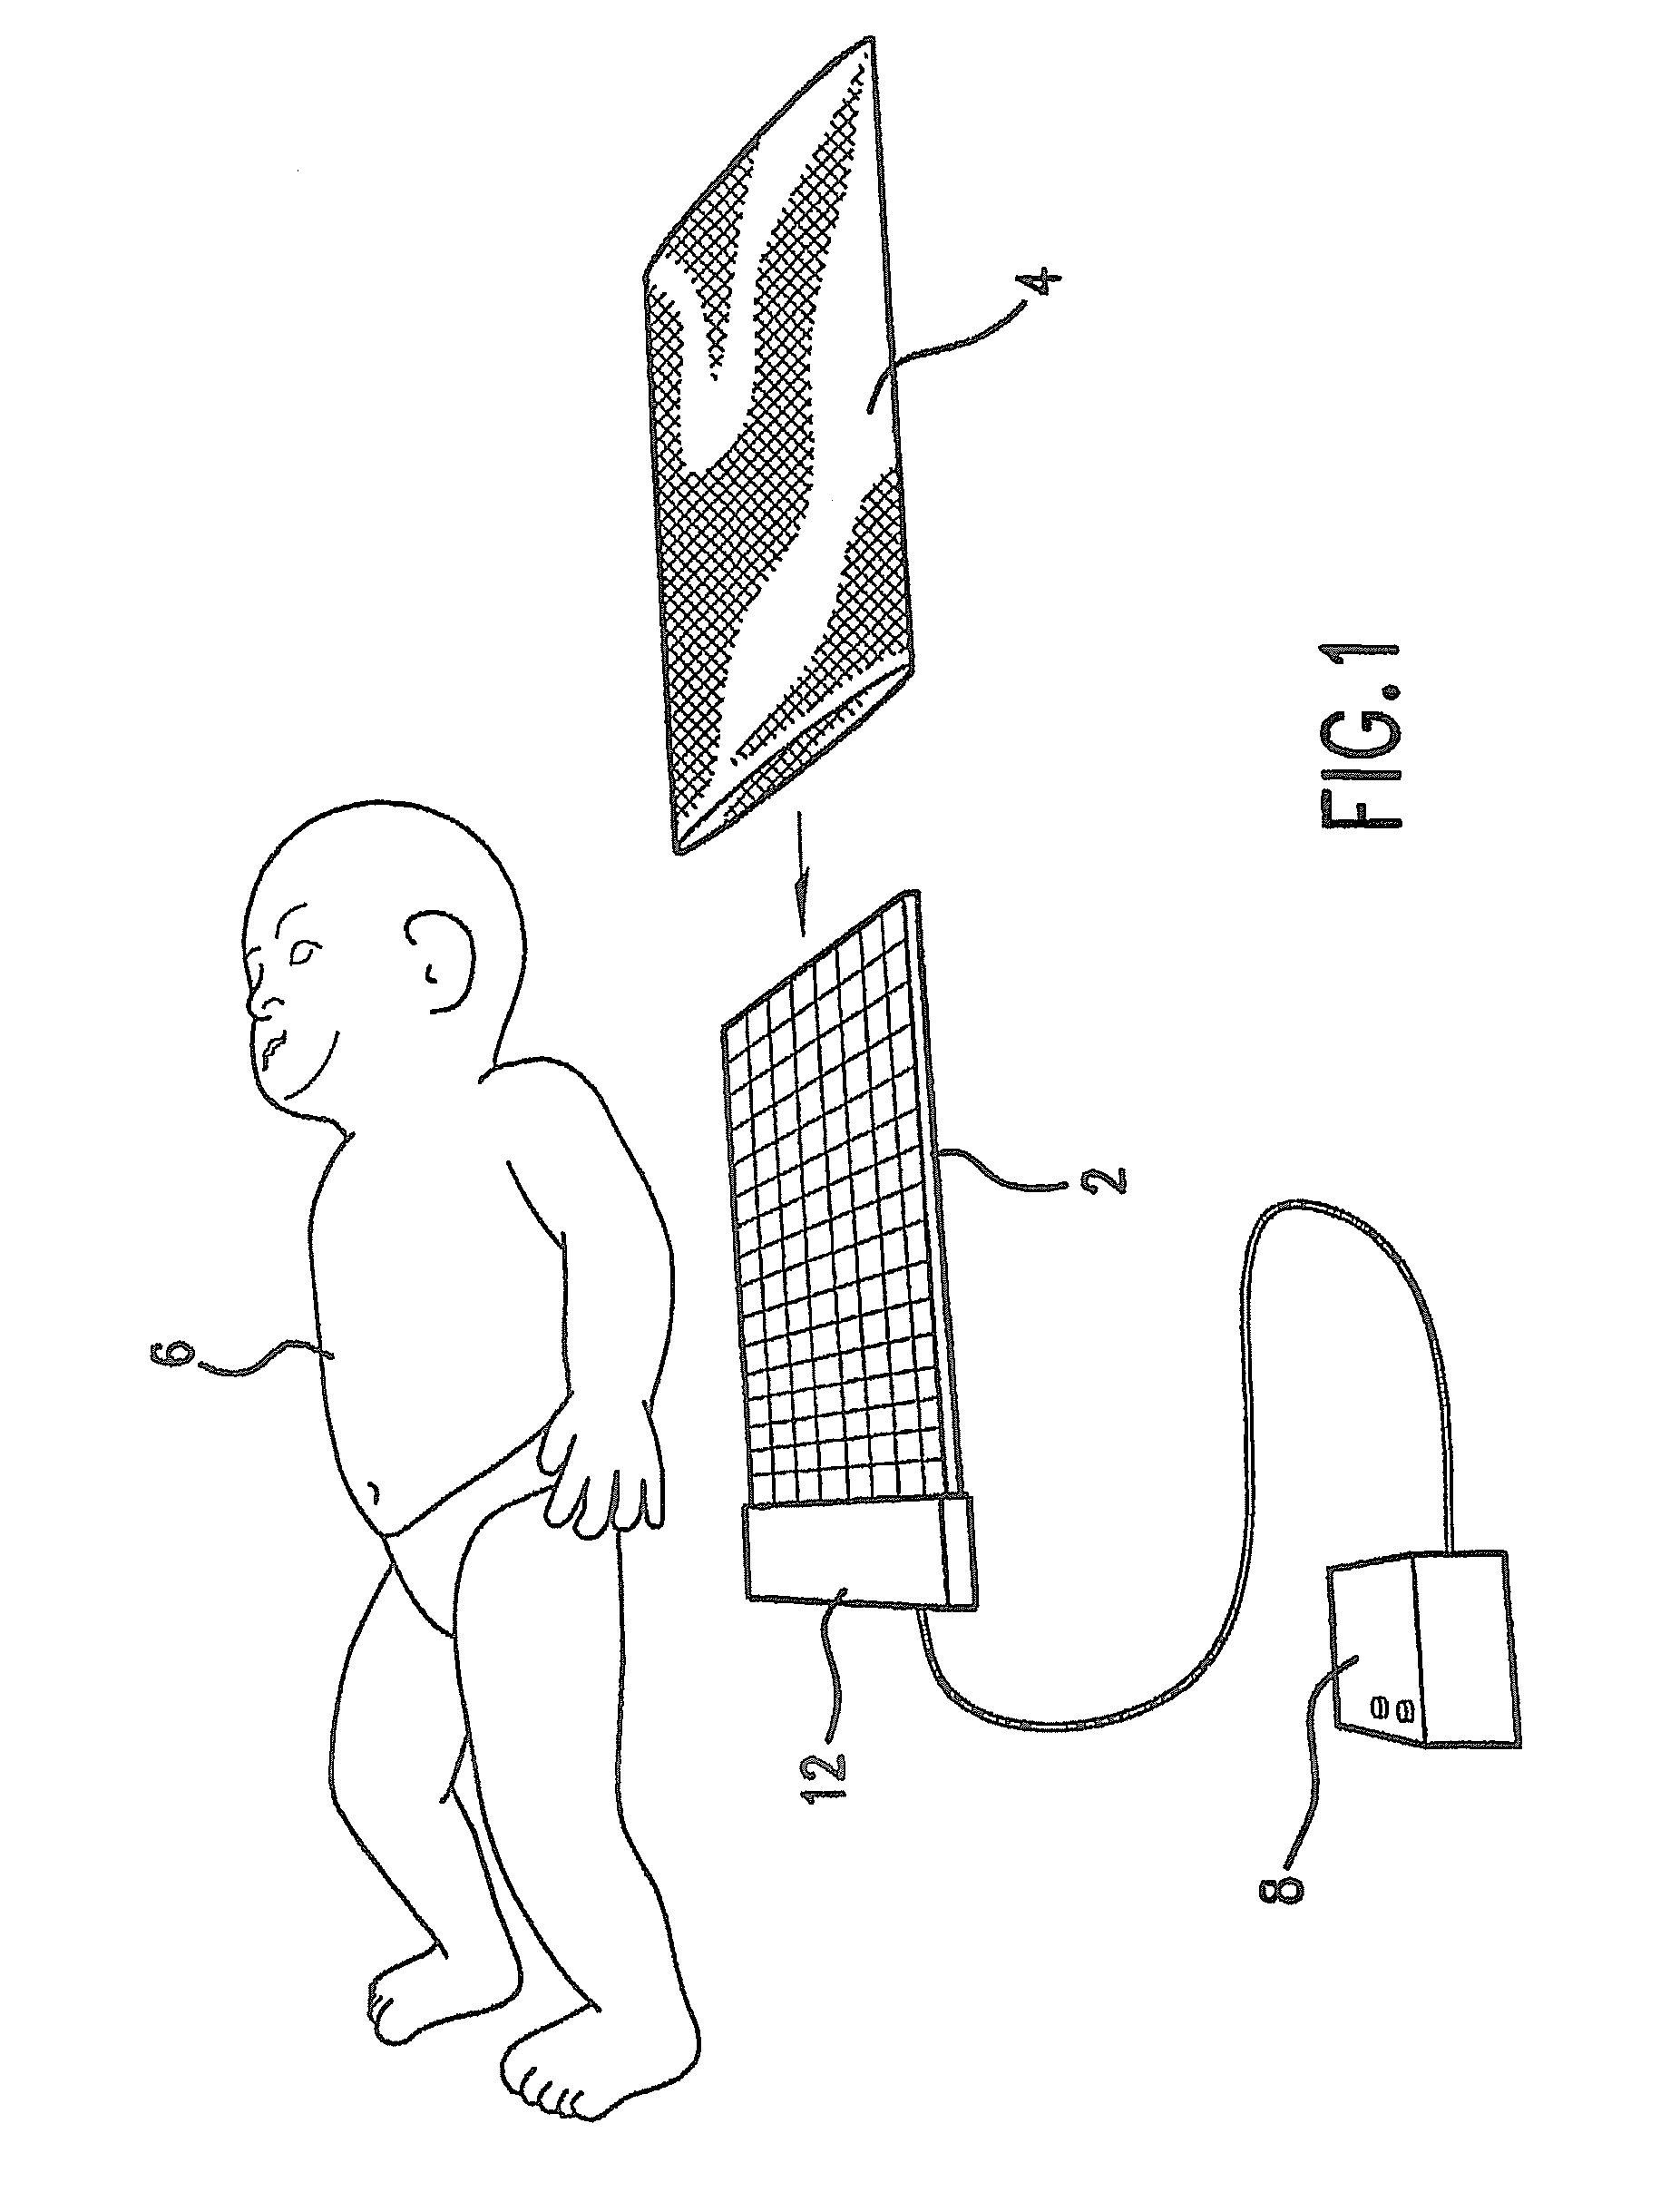 Device and method of phototherapy for jaundiced infants